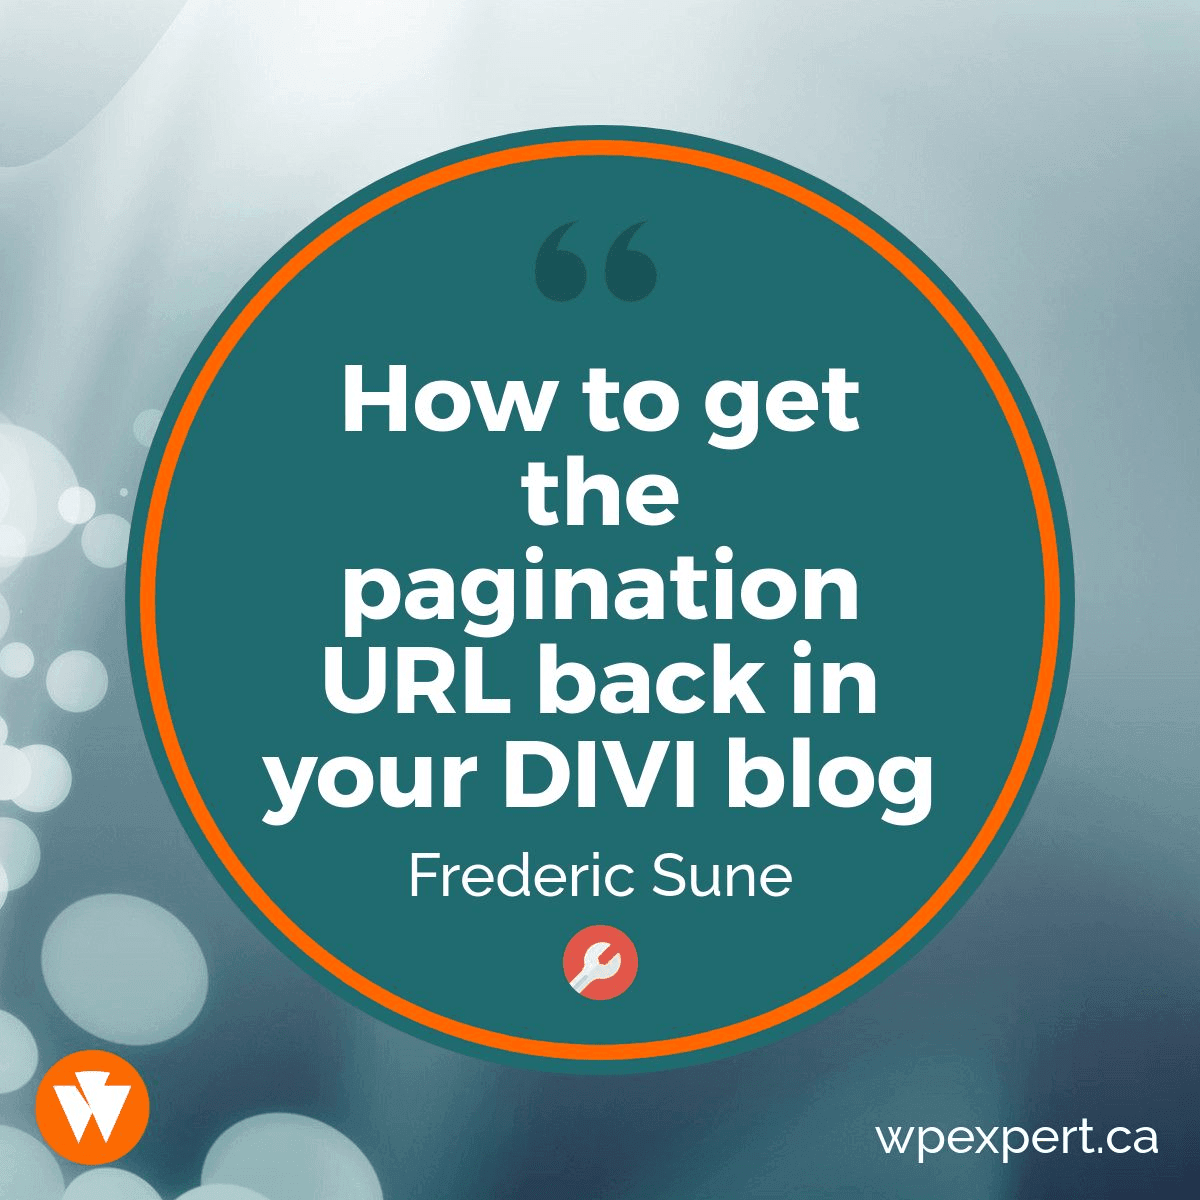 How to get the pagination URL back in your DIVI blog